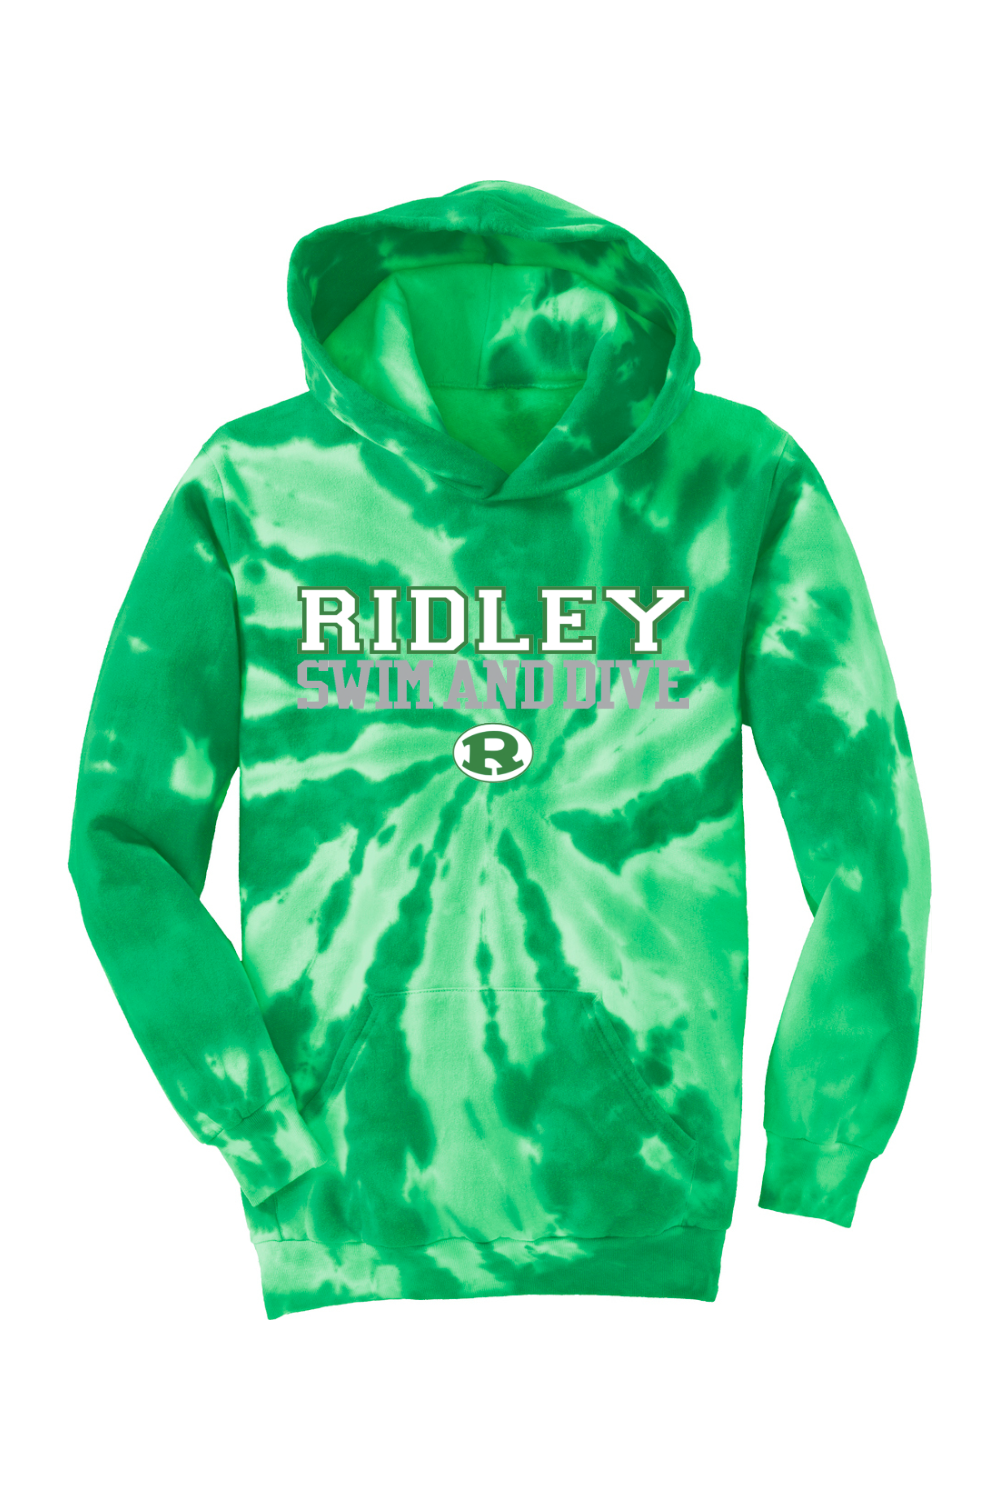 Ridley Swim and Dive Port & Company Youth Tie-Dye Pullover Hooded Sweatshirt